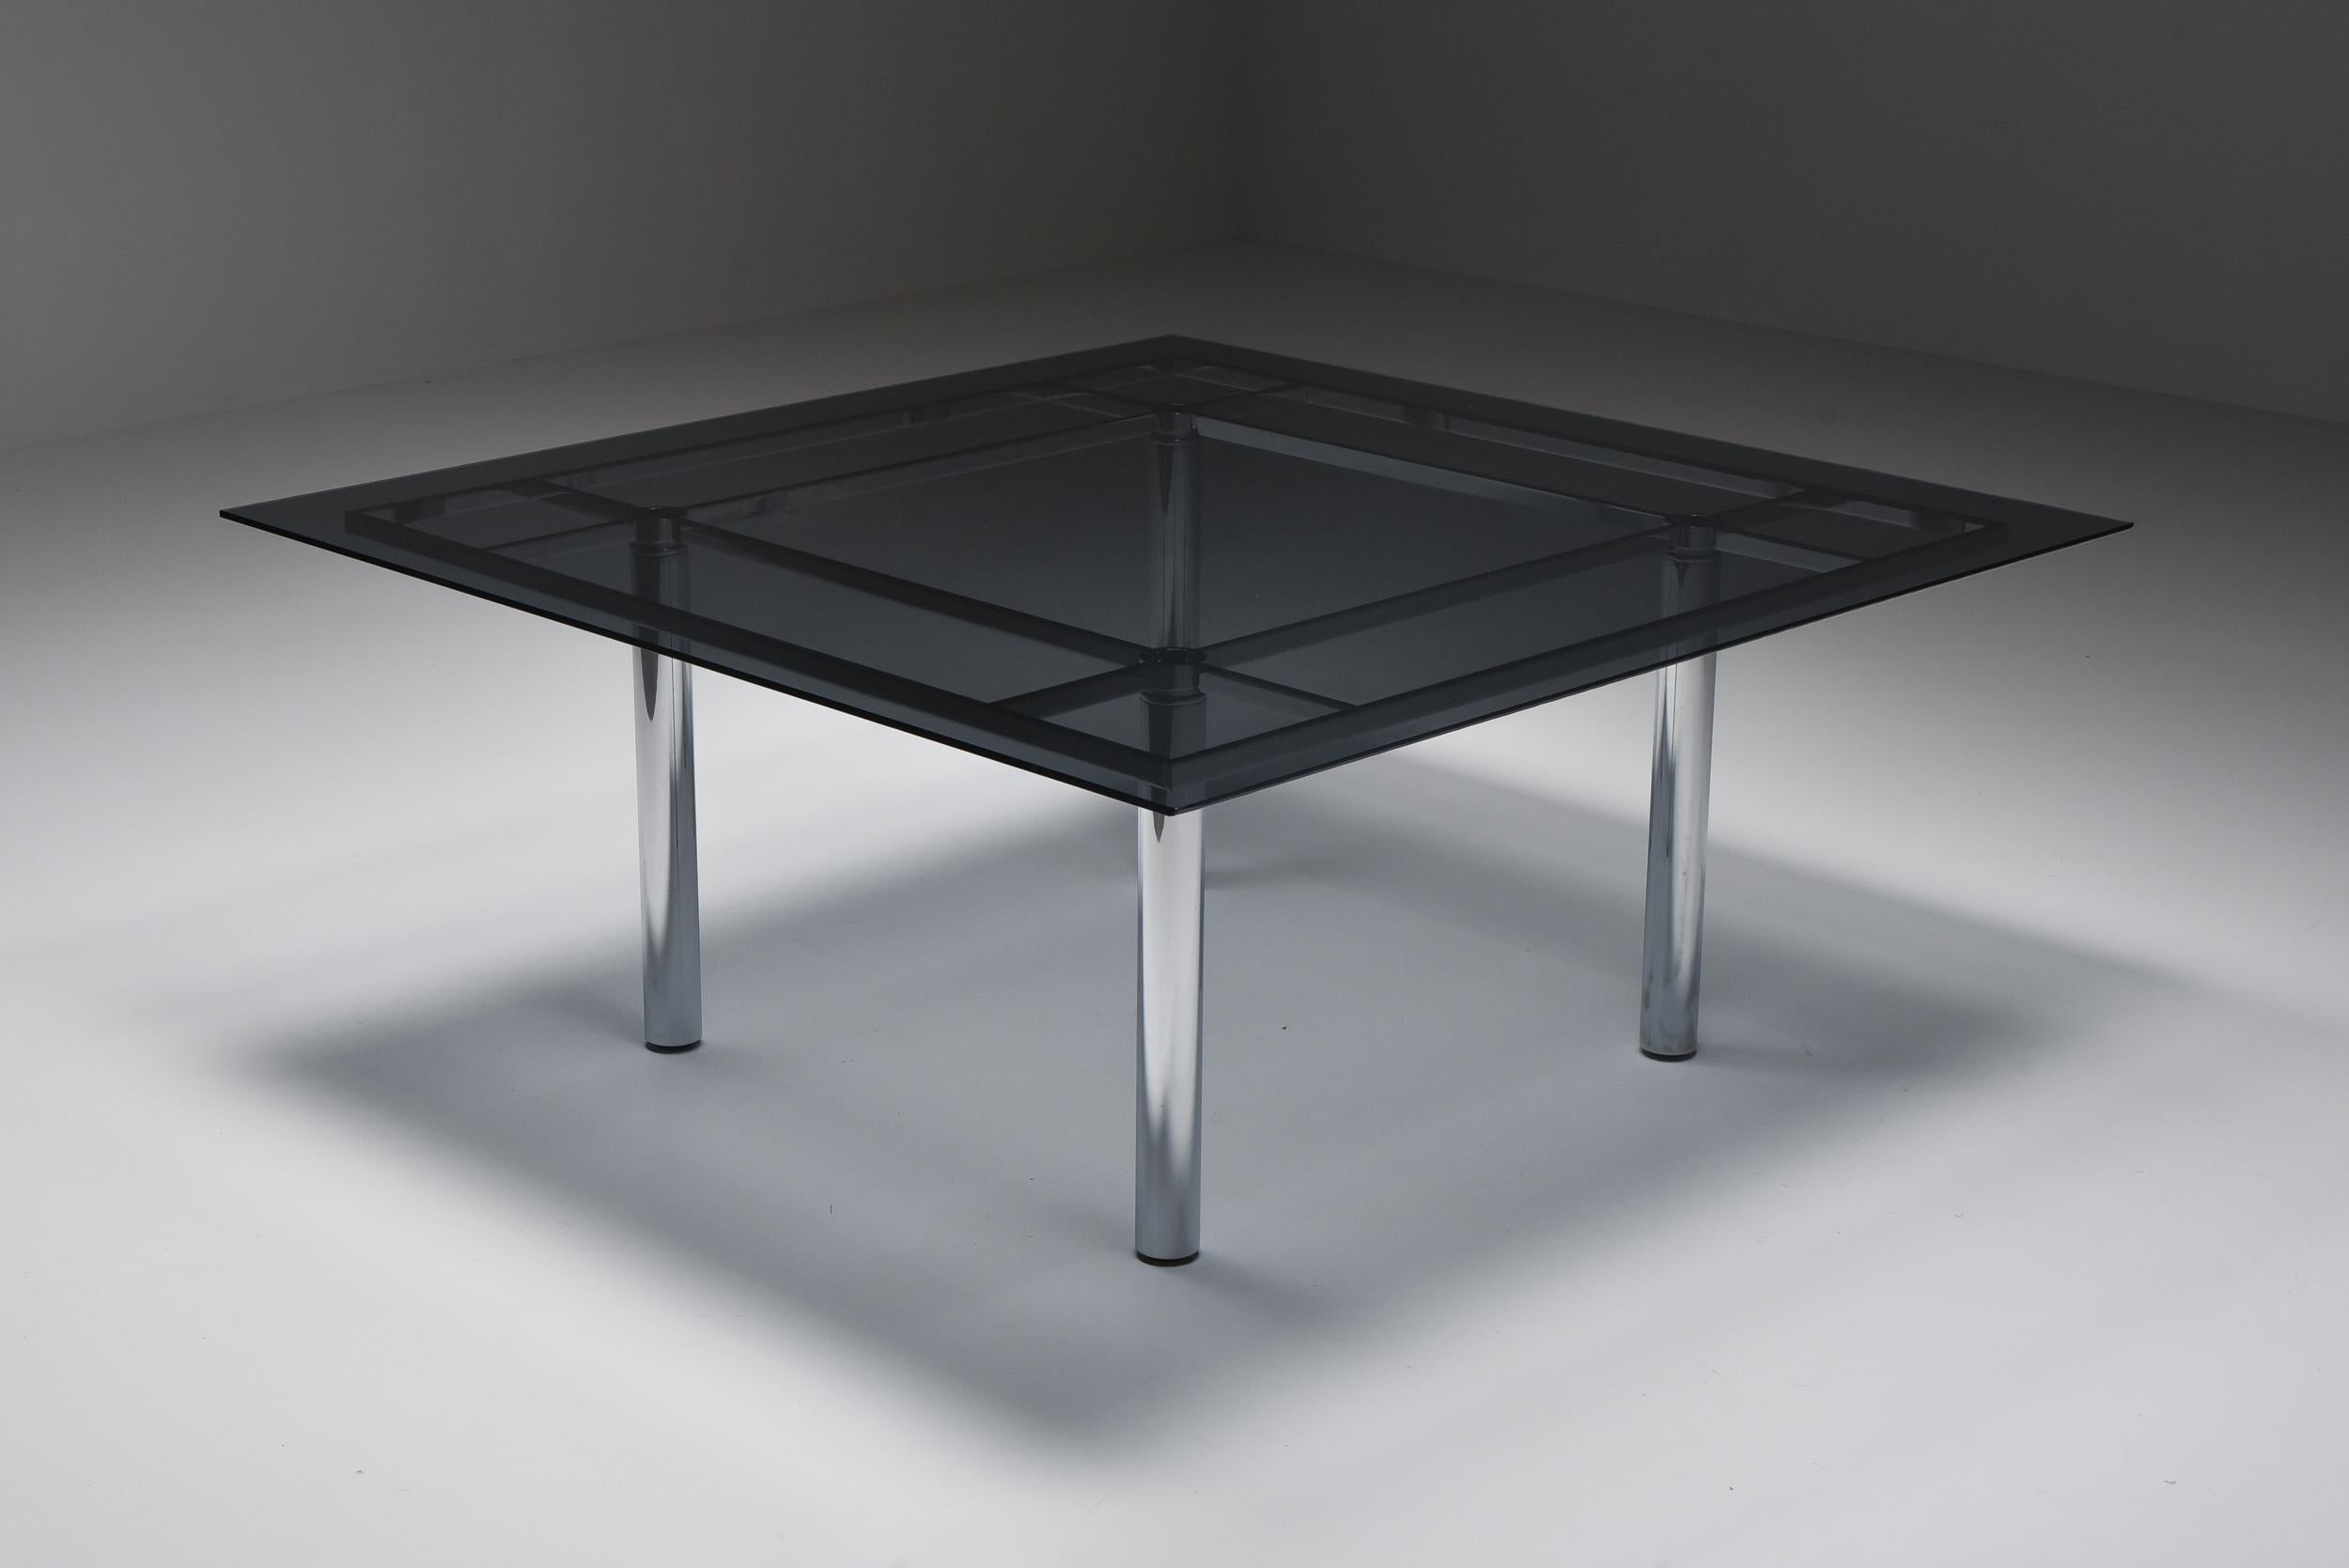 Scarpa; Knoll International; Italian Design; 1970's; André model; dining table; glass table; Post-modern; Mid-Century Modern; 

Knoll dining table with solid chrome frame and glass tabletop, designed by Tobia Scarpa for Knoll International. The